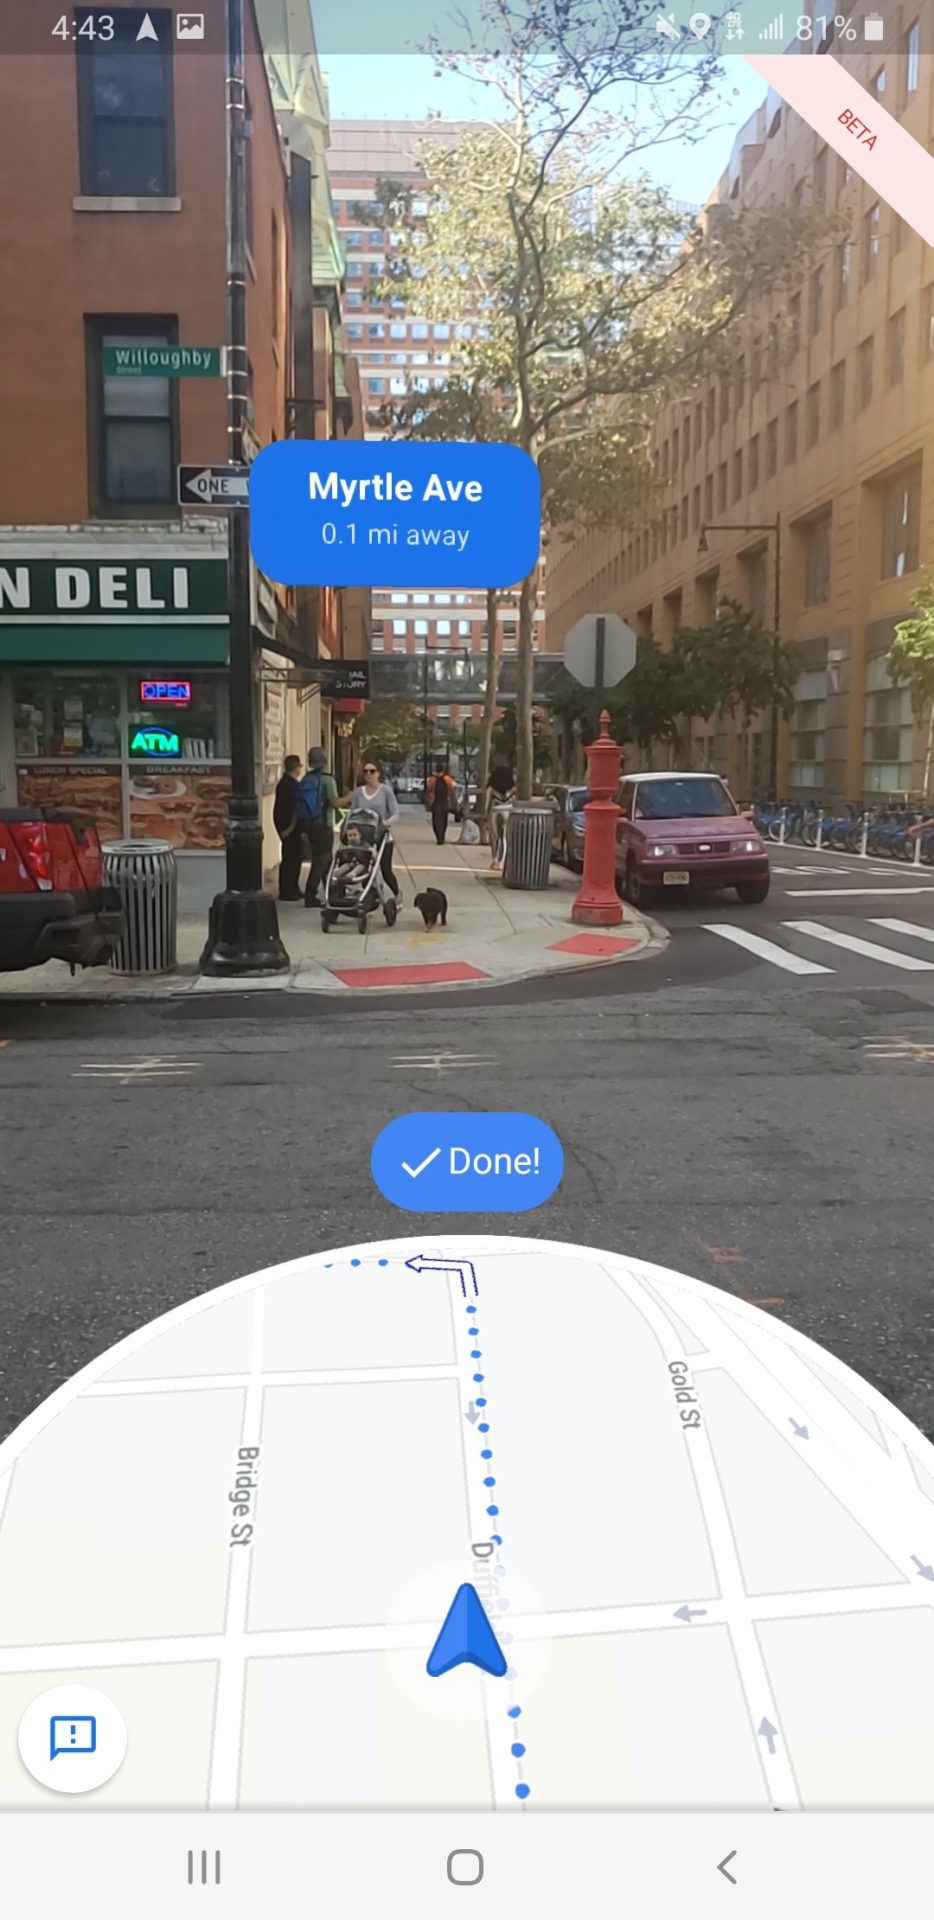 a screenshot of a phone screen showing a street corner with cars and people